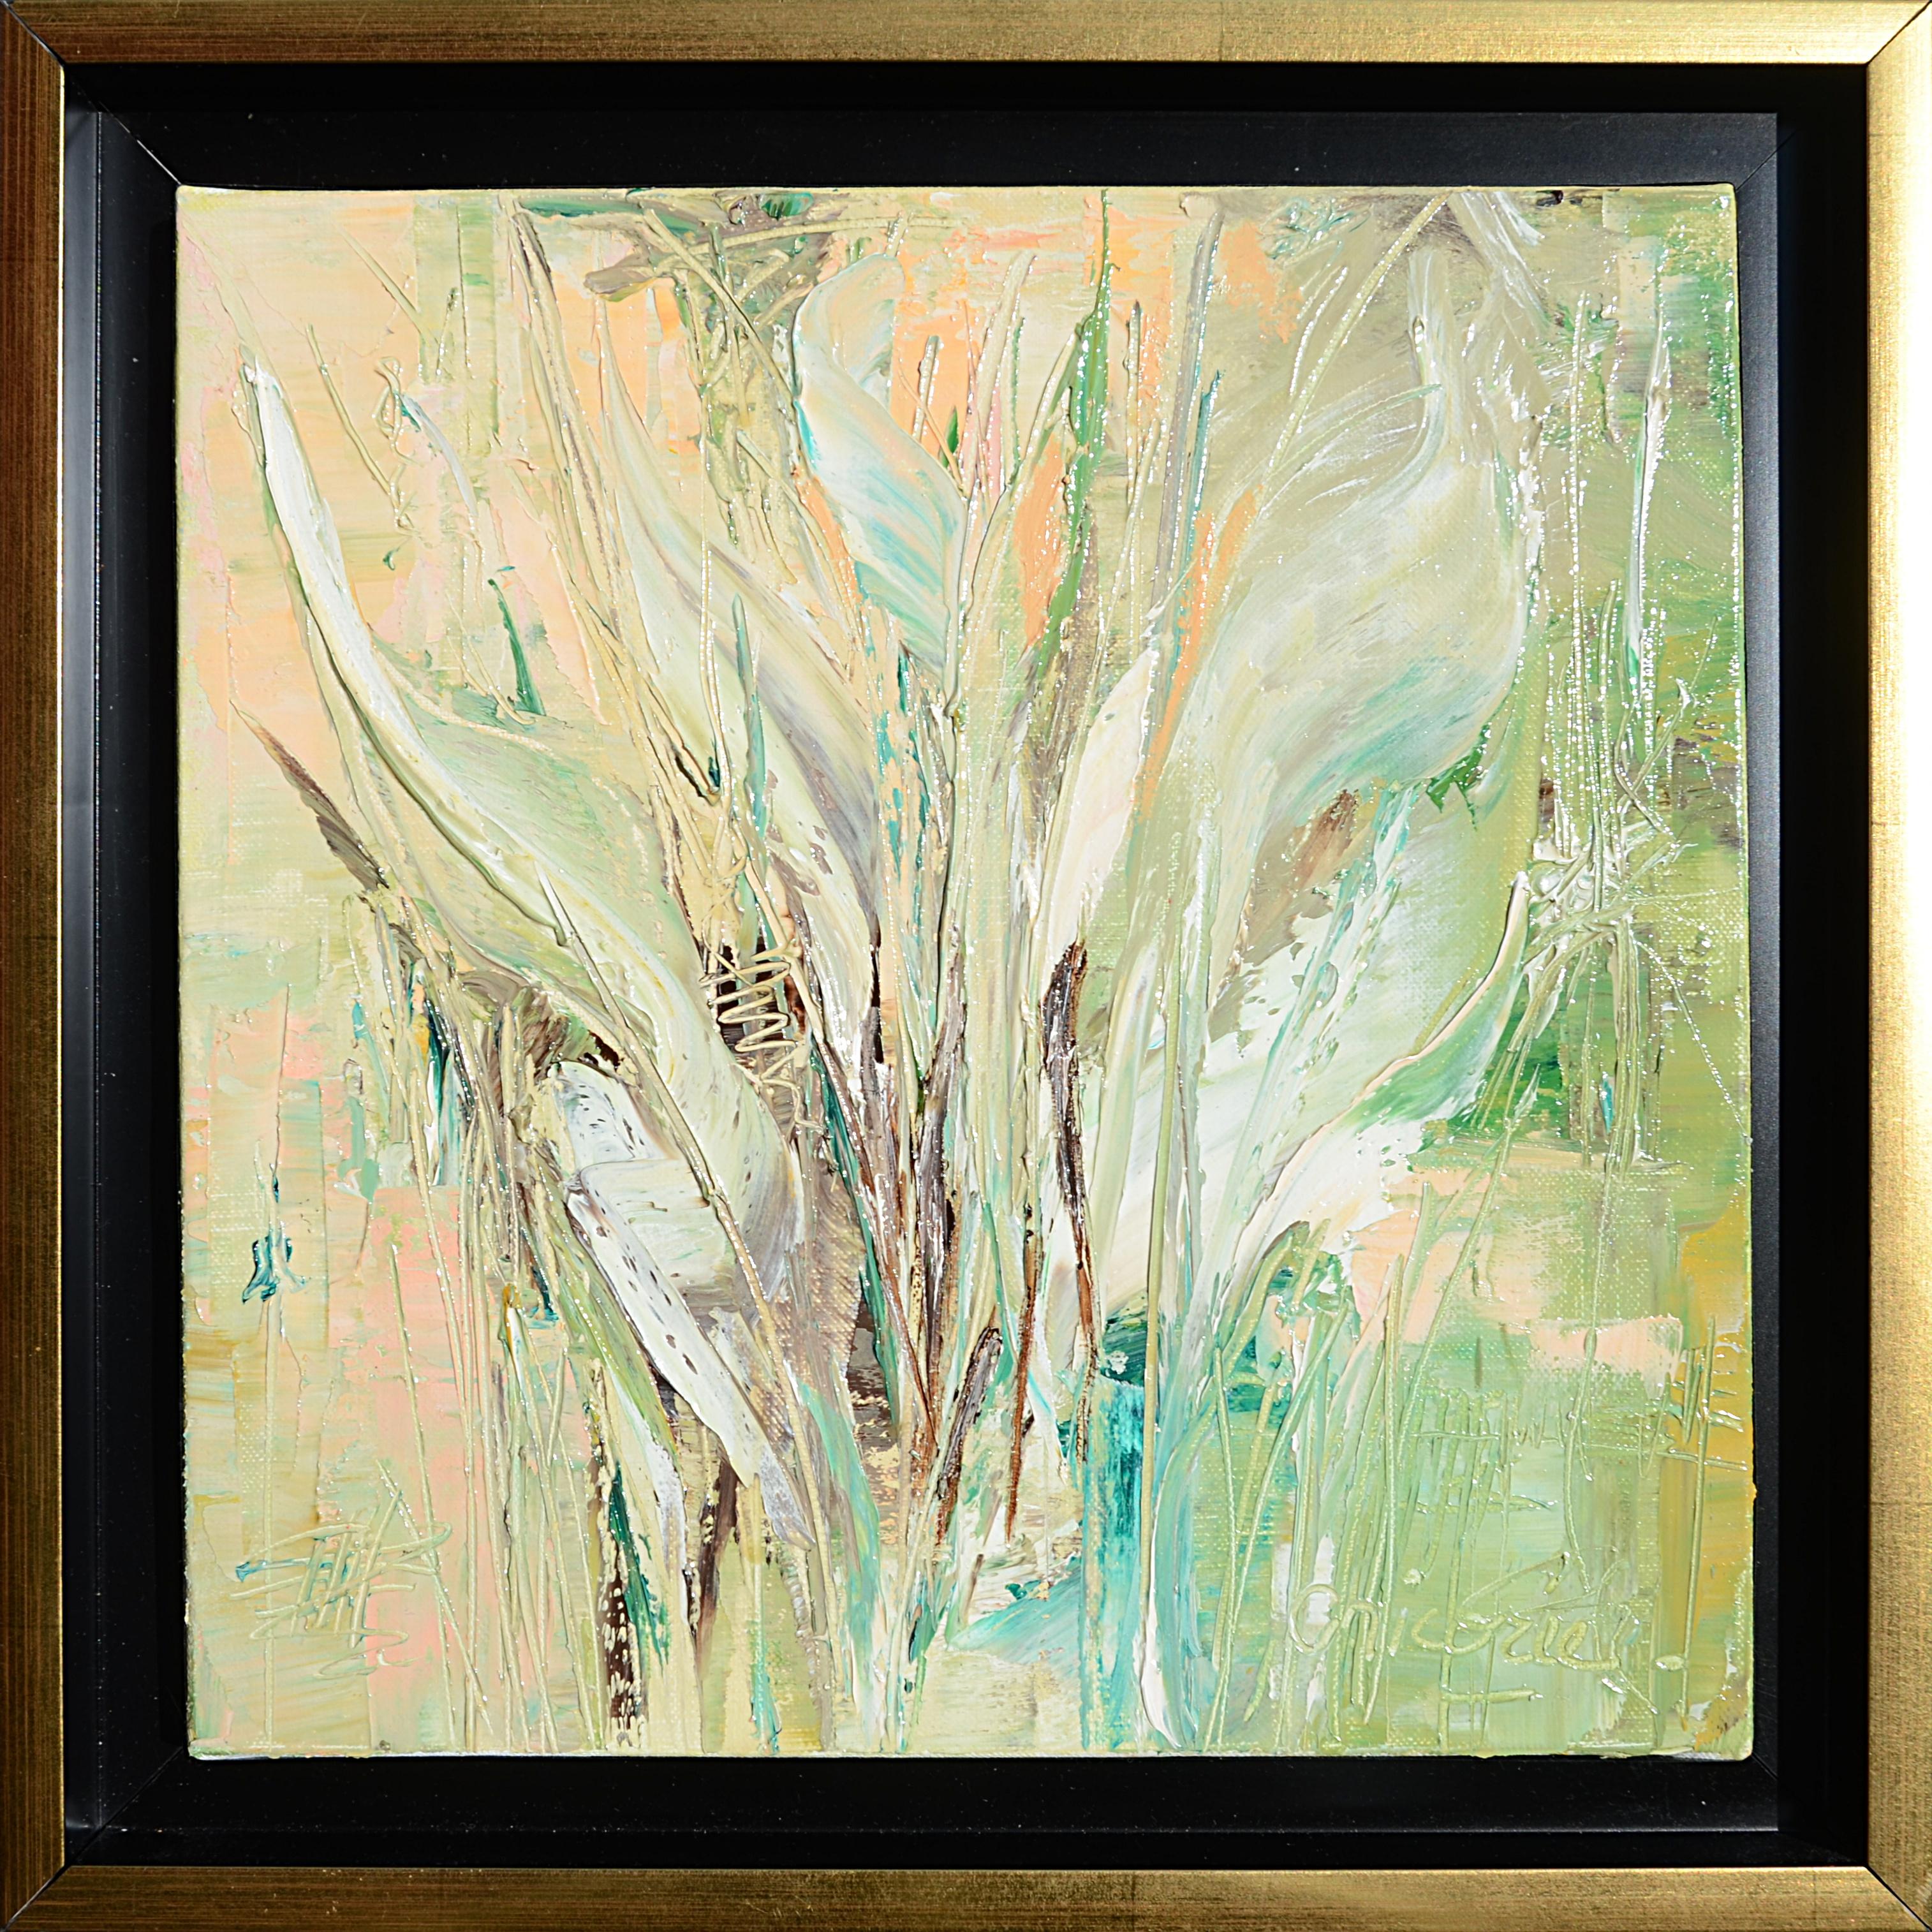 Chicorée Abstract Painting – Folliage, Light Green and Light Orange Abstract Oil Painting